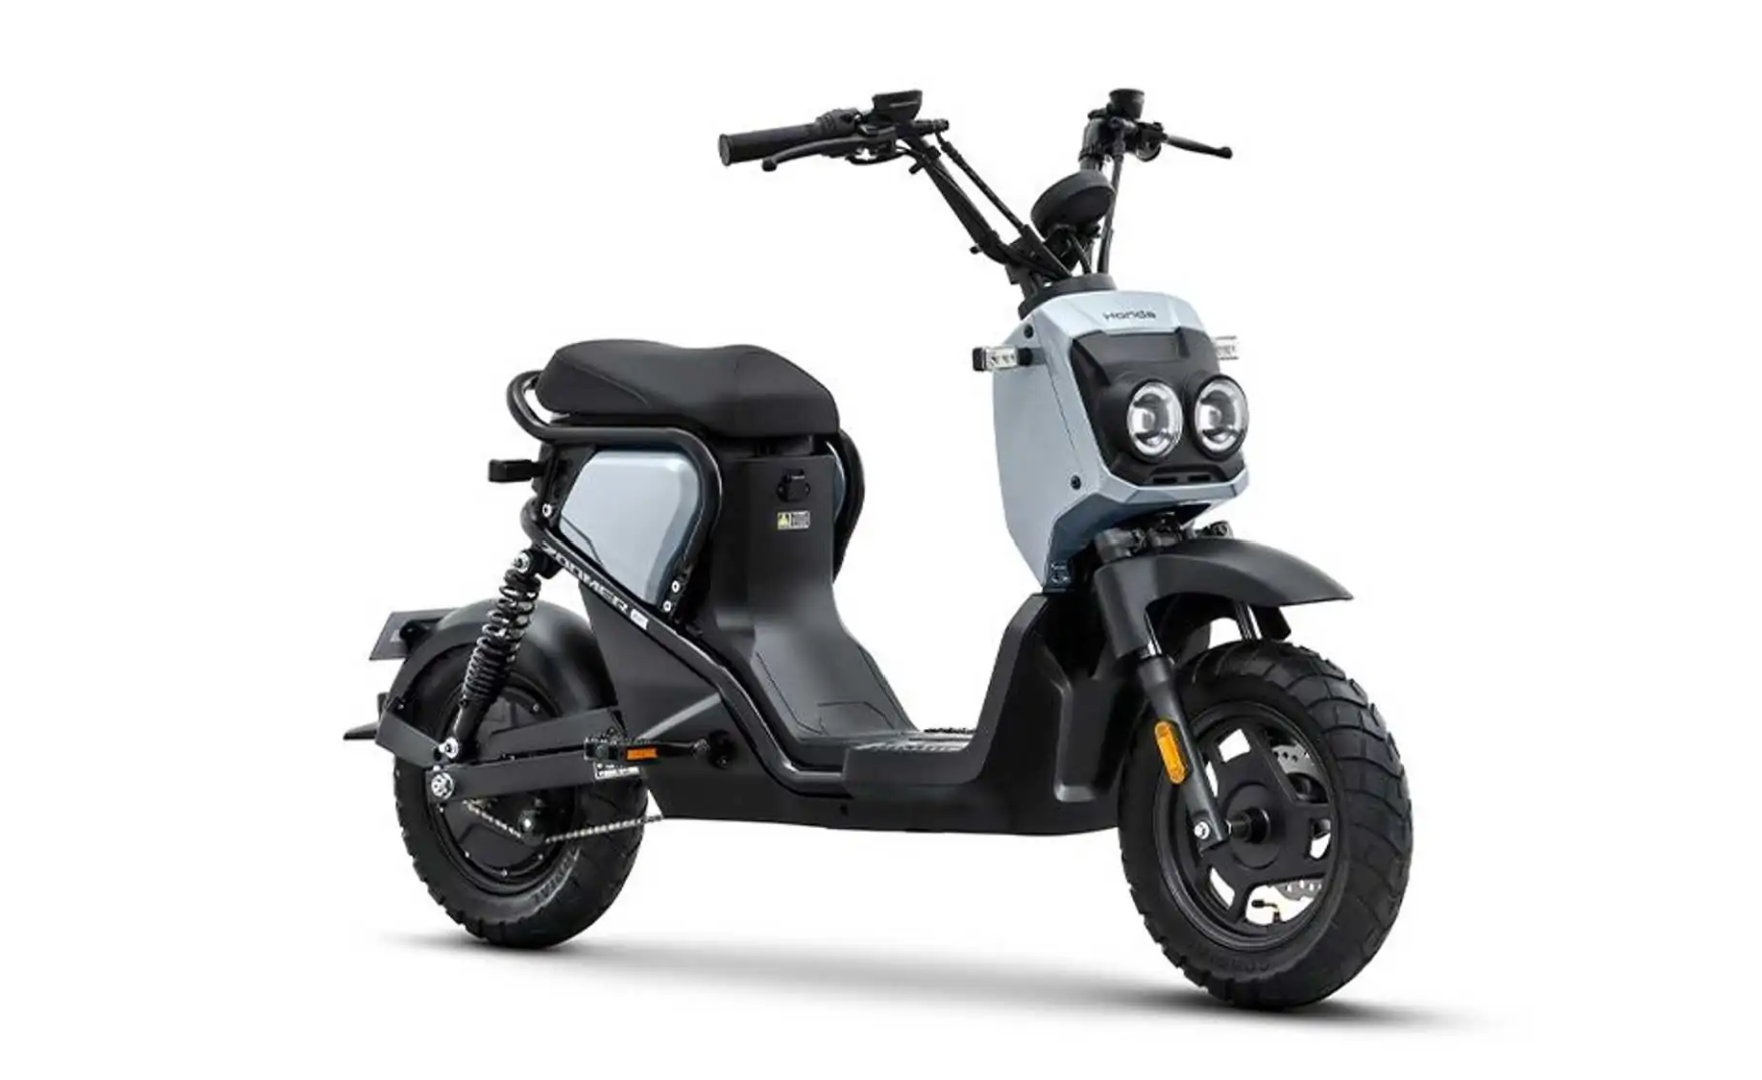 At vise pige udeladt Honda Dax, Cub, and Zoomer e-Scooter Models Announced in China - Gizmochina